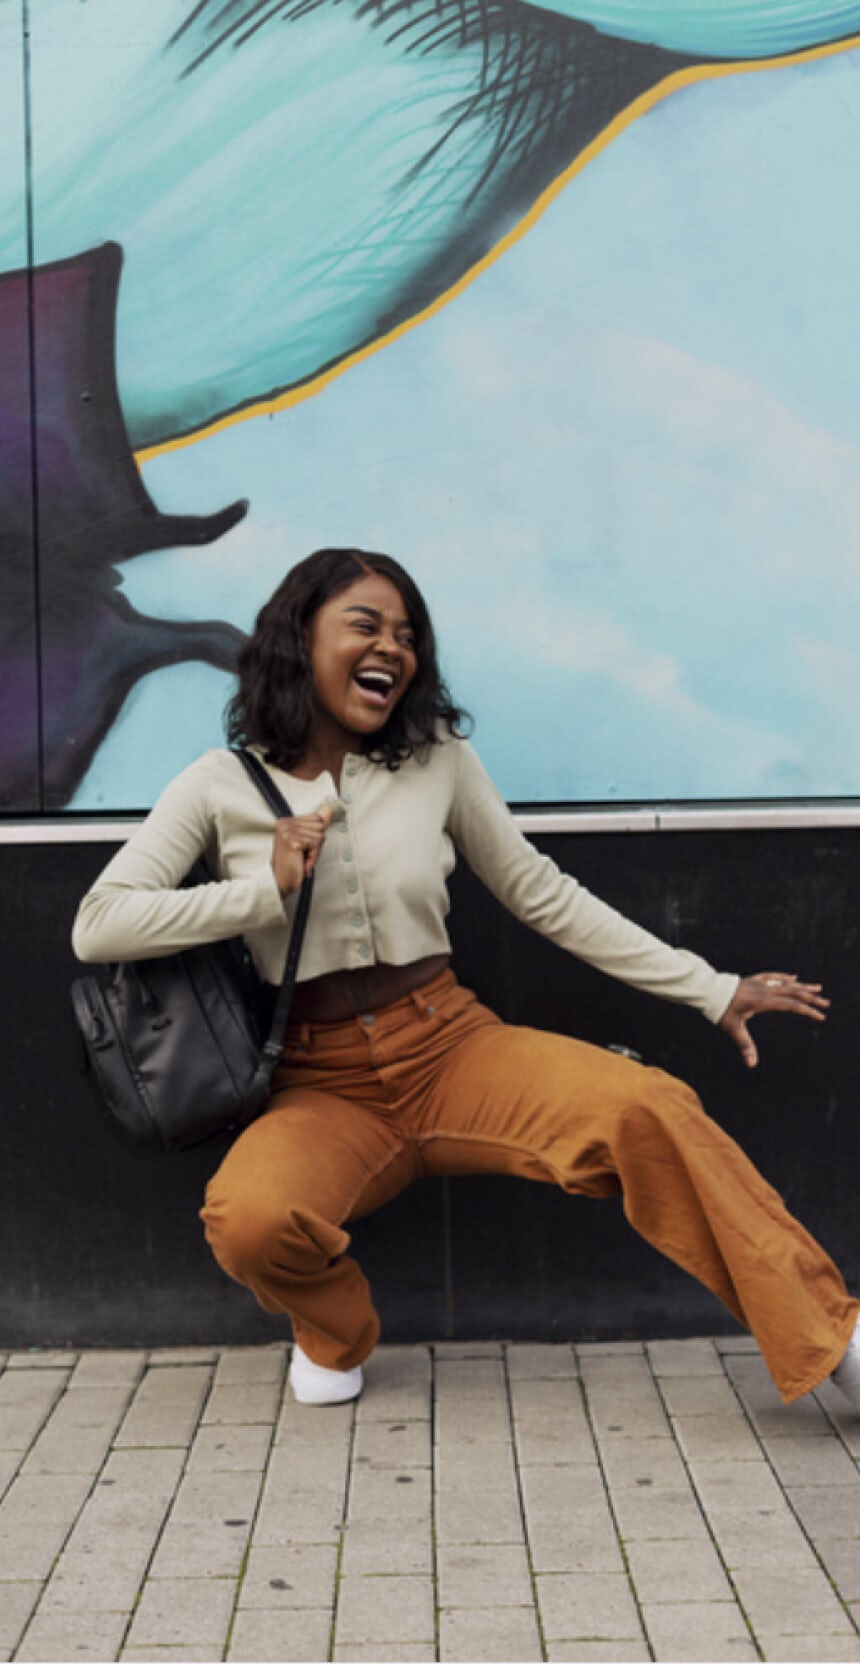 A girl dances in front of a wall and smiles.